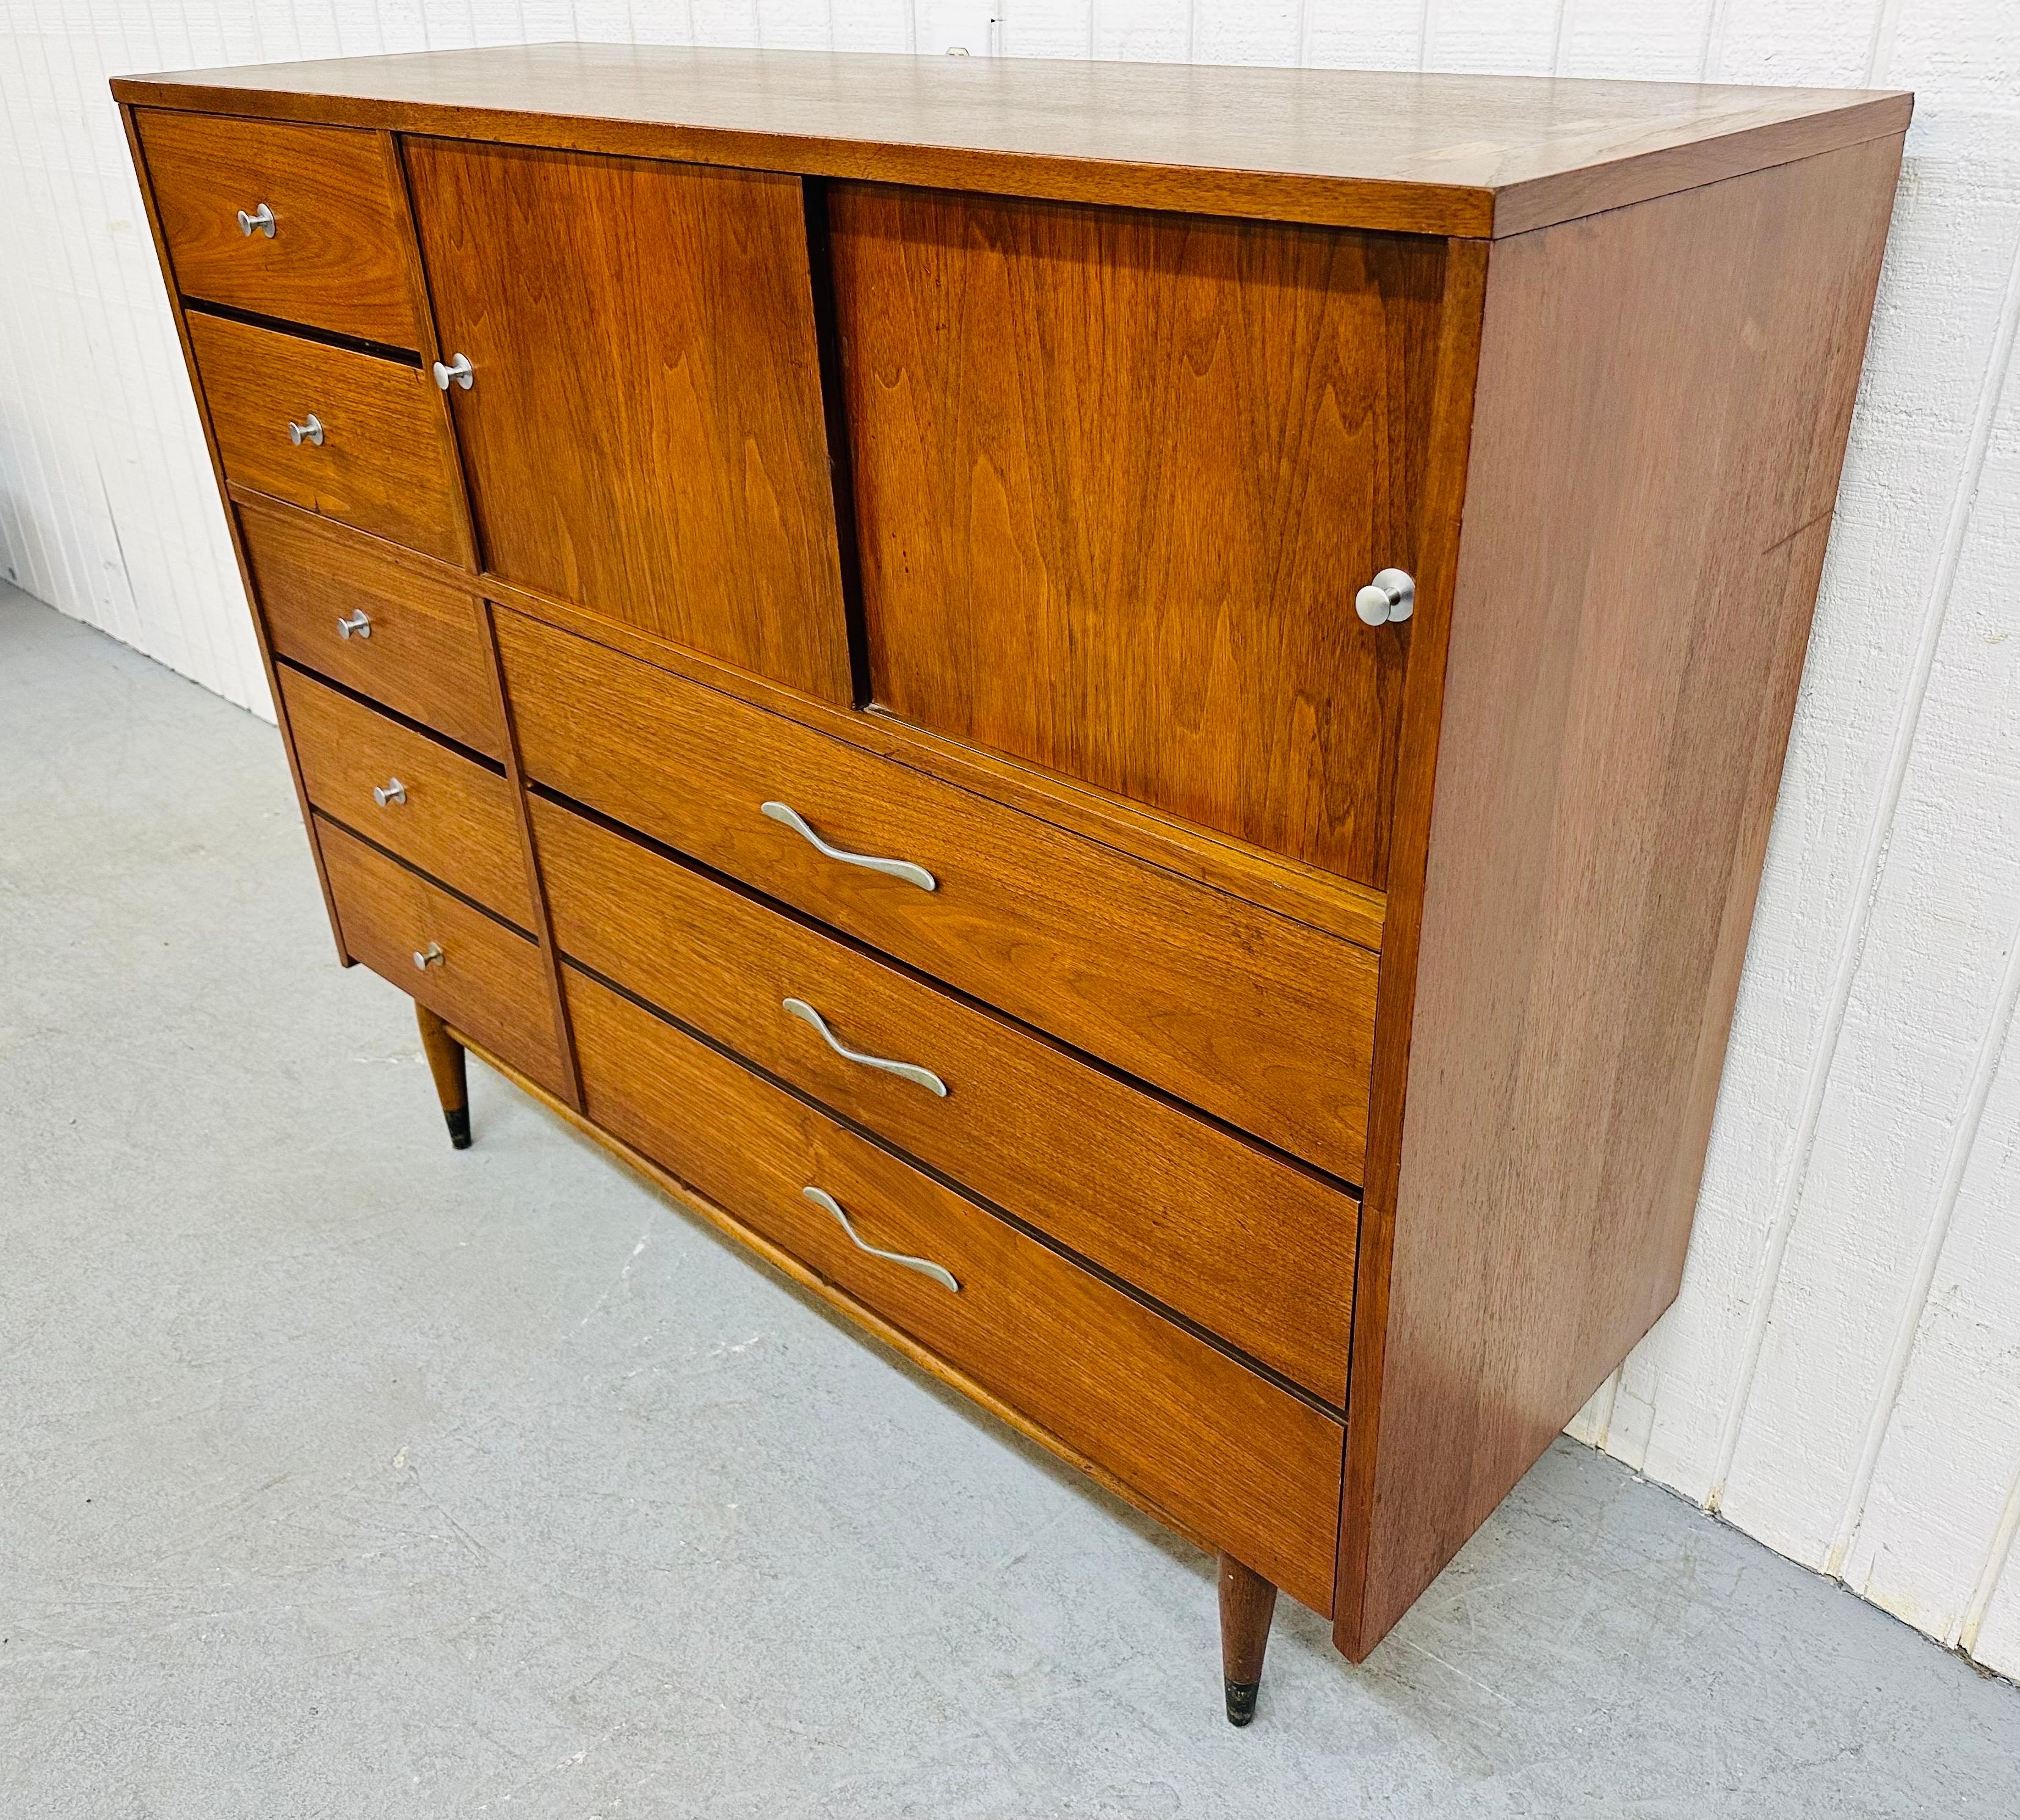 This listing is for a rare Mid-Century Modern Lane acclaim walnut Gentlemen’s chest. Featuring four drawers on the left side, two larger drawers on the bottom right side, sliding cabinet doors on the upper right that reveal more storage space,